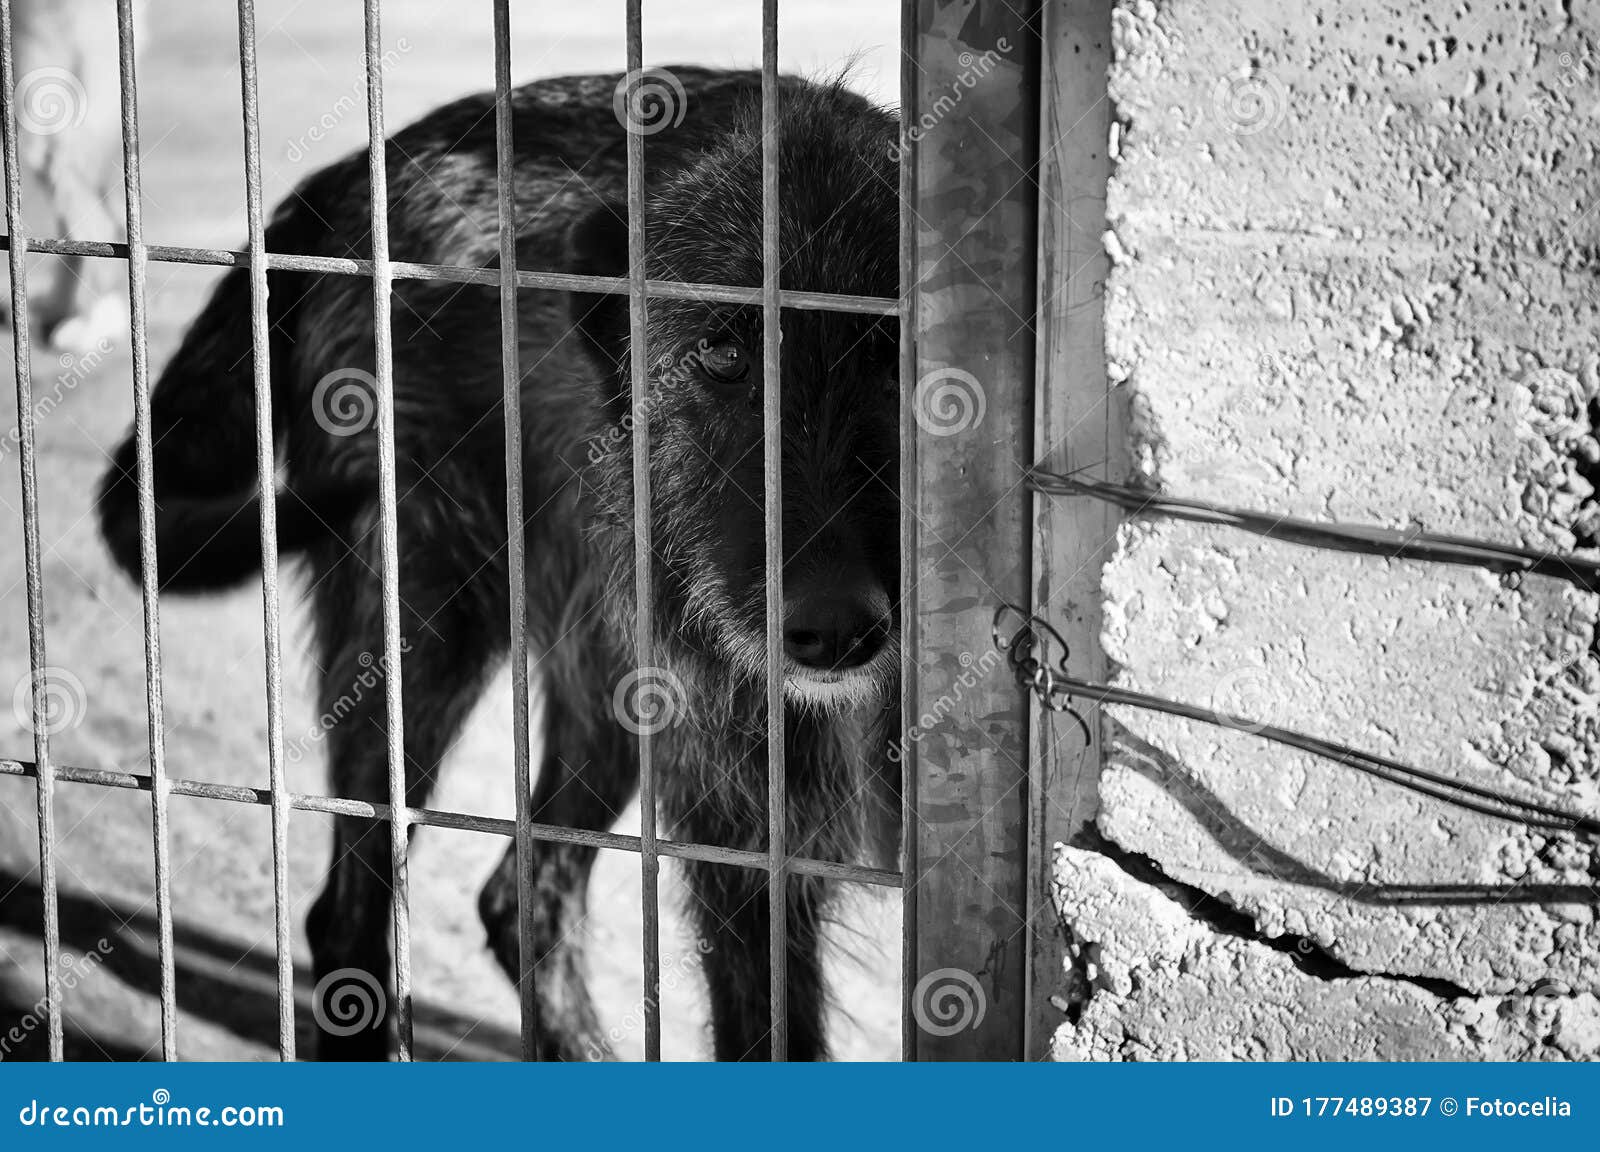 Dogs in cages stock image. Image of hound, adorable - 177489387